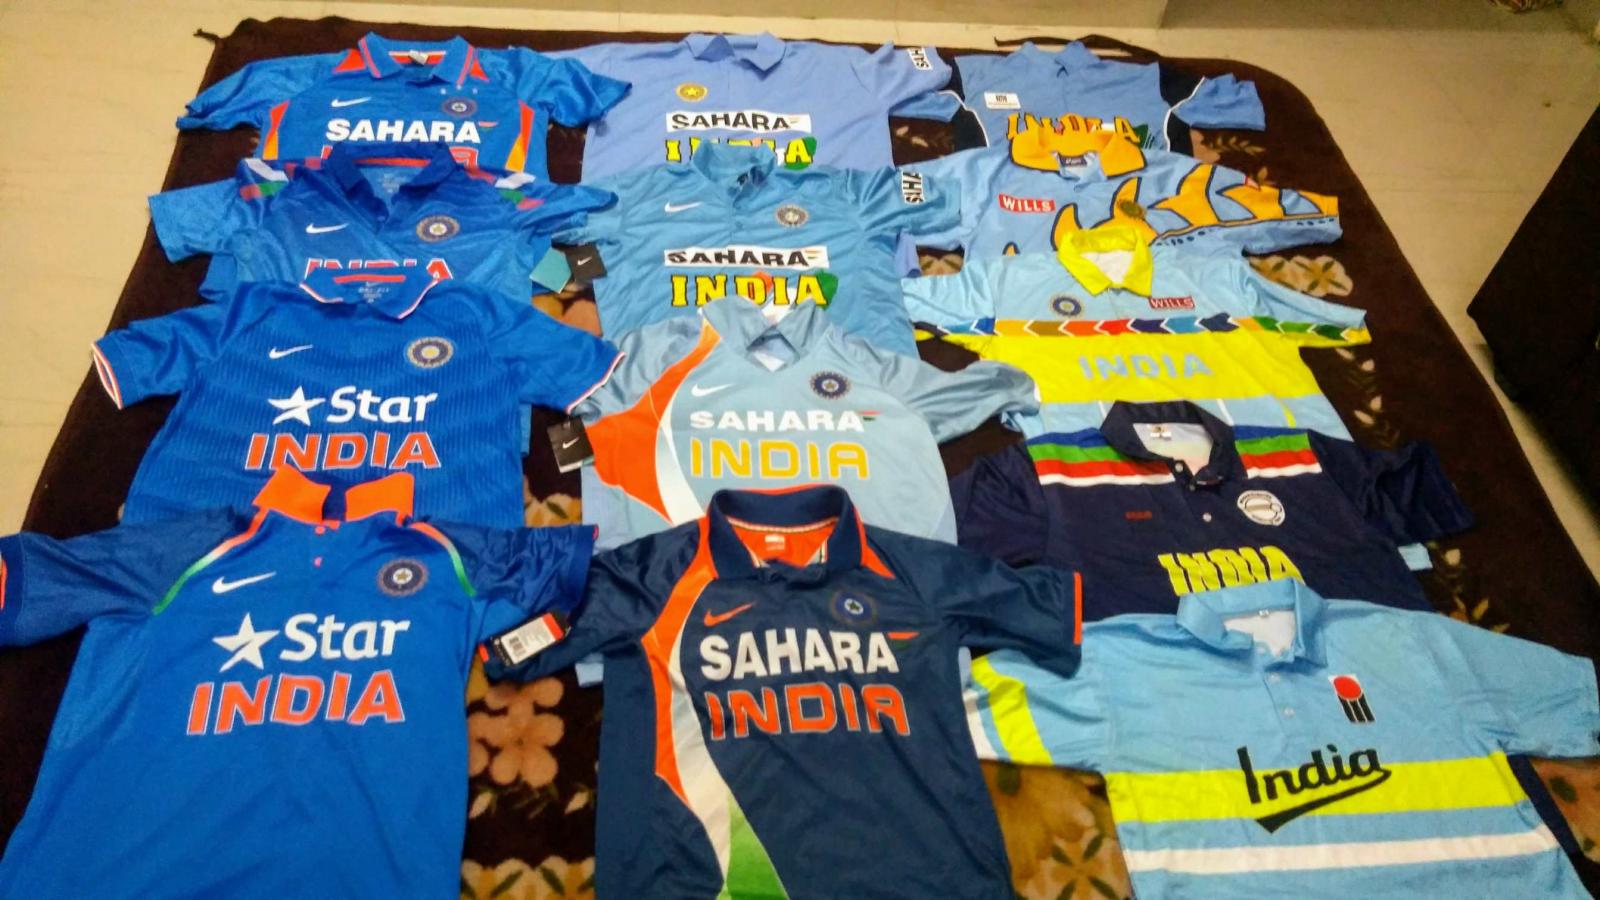 indian cricket jersey over the years